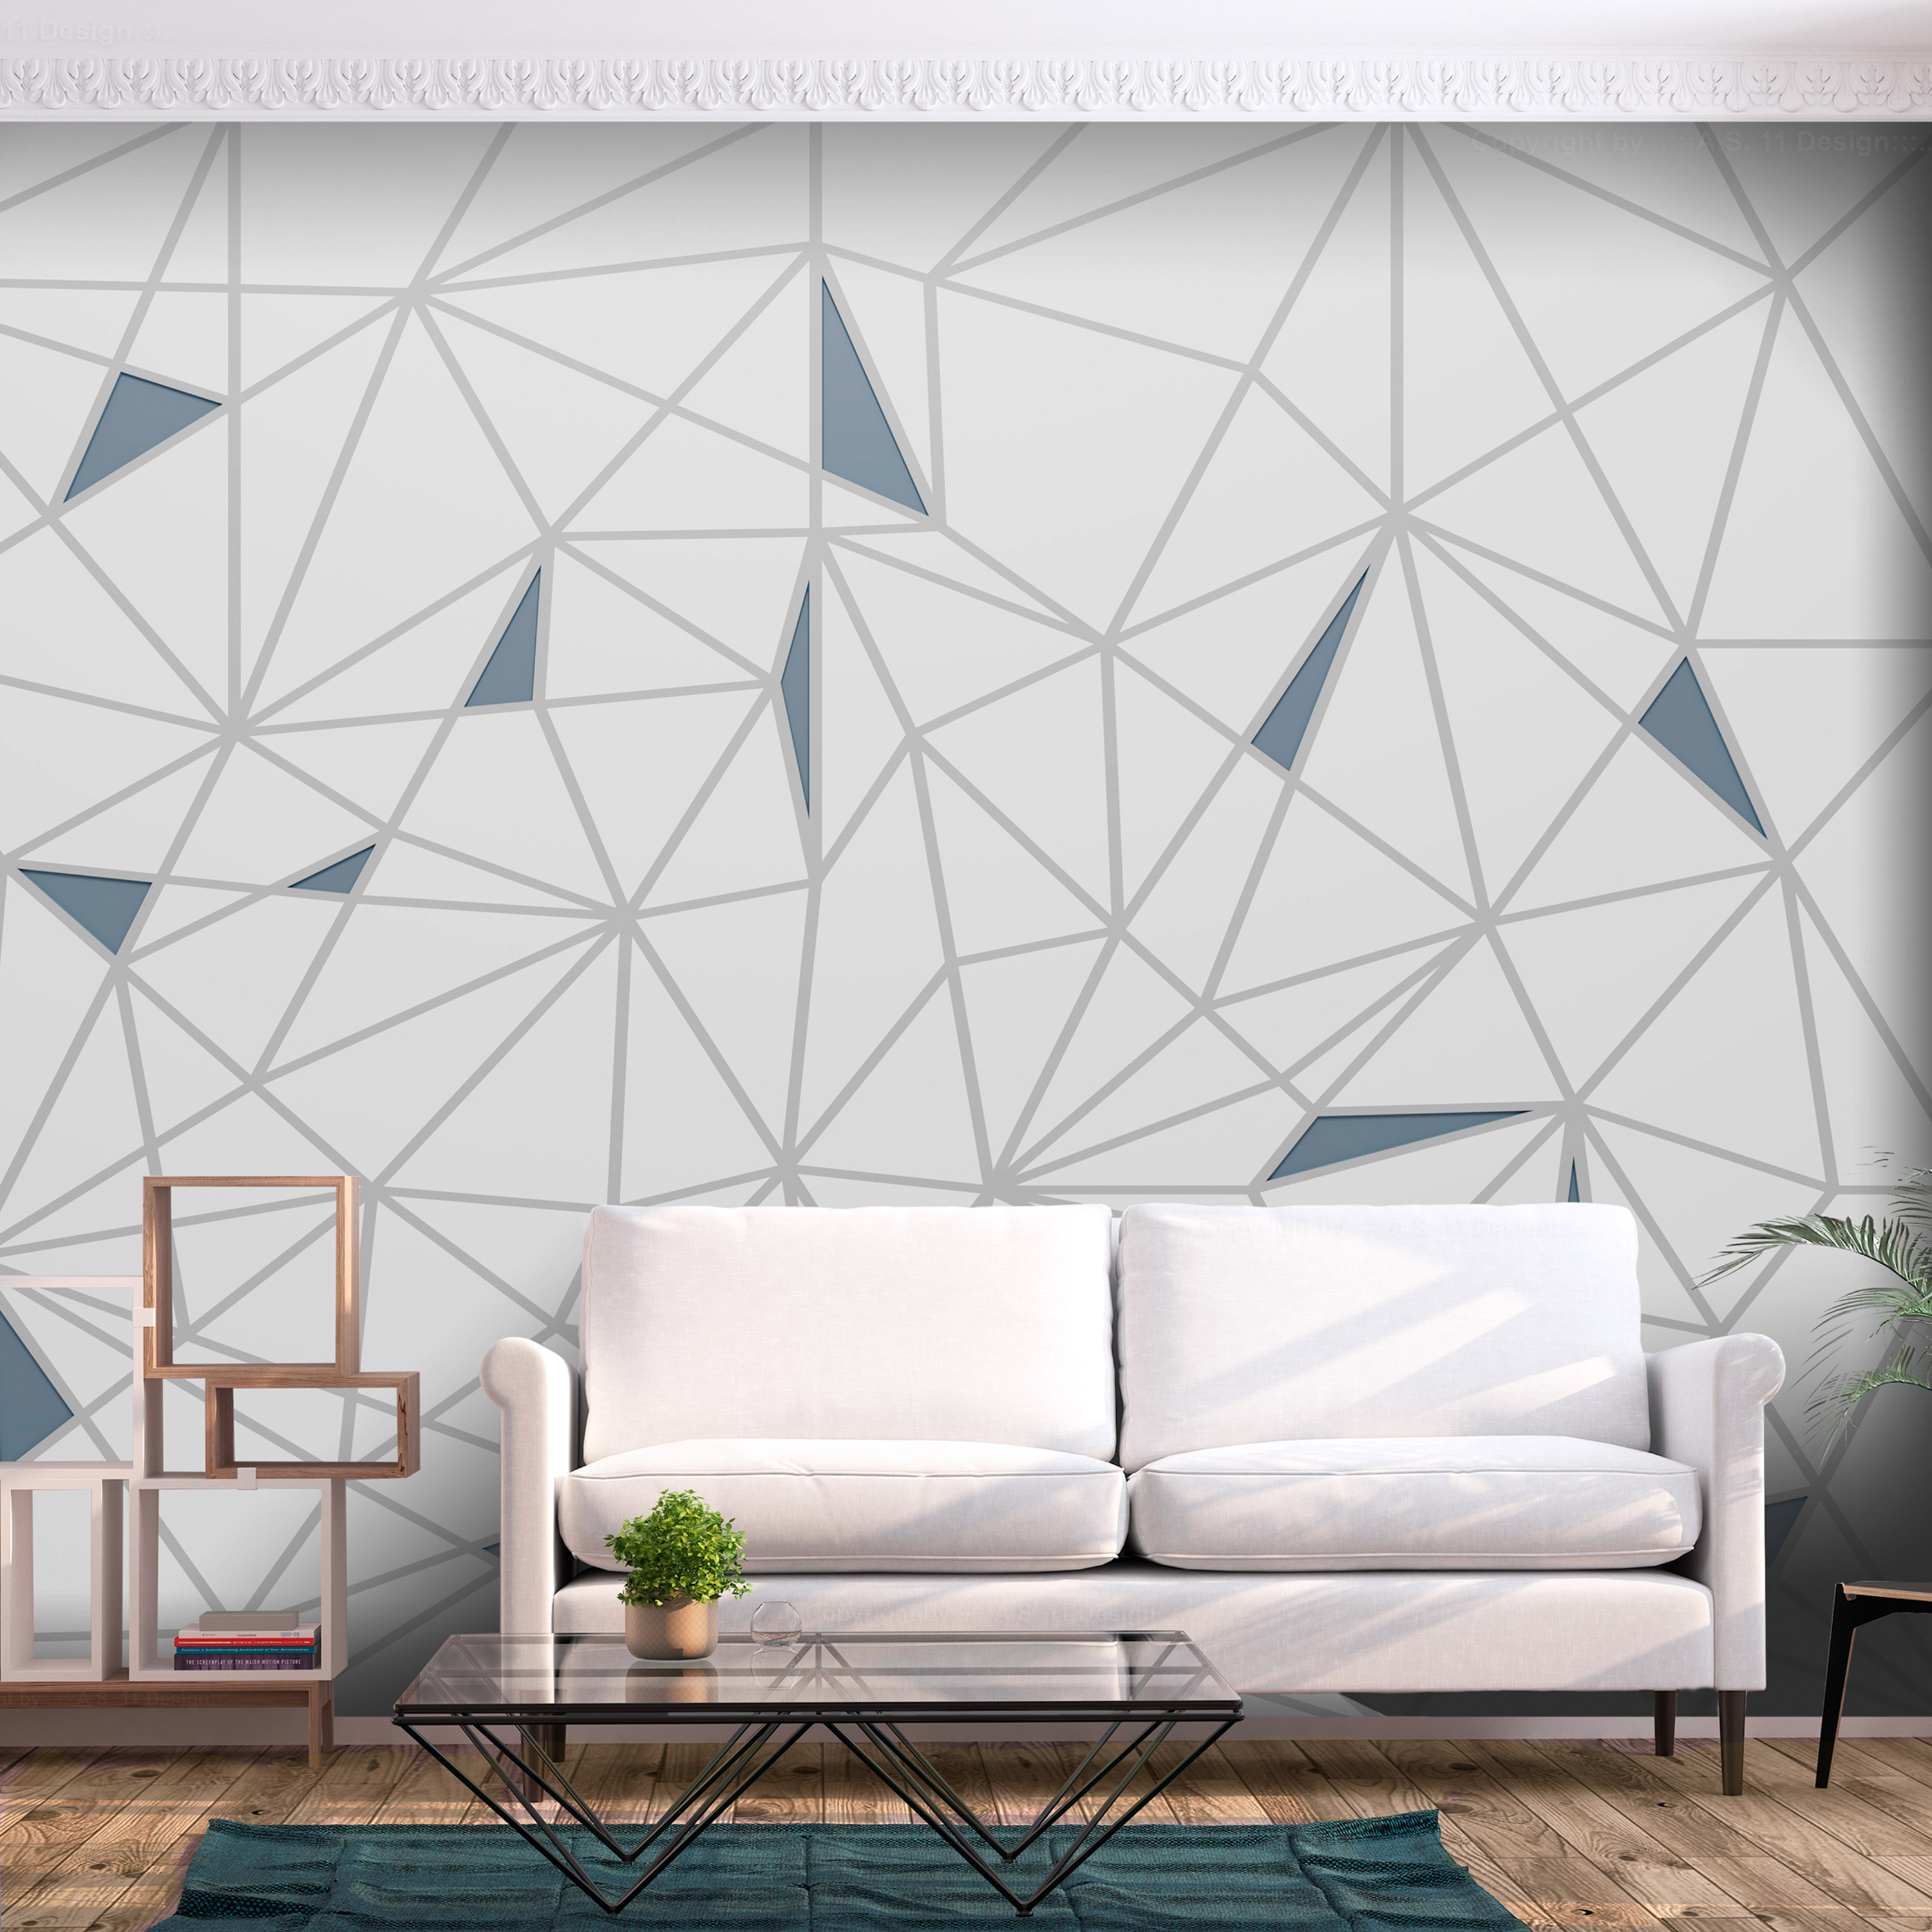 Self-adhesive Wallpaper - Lines of Intersection - 441x315